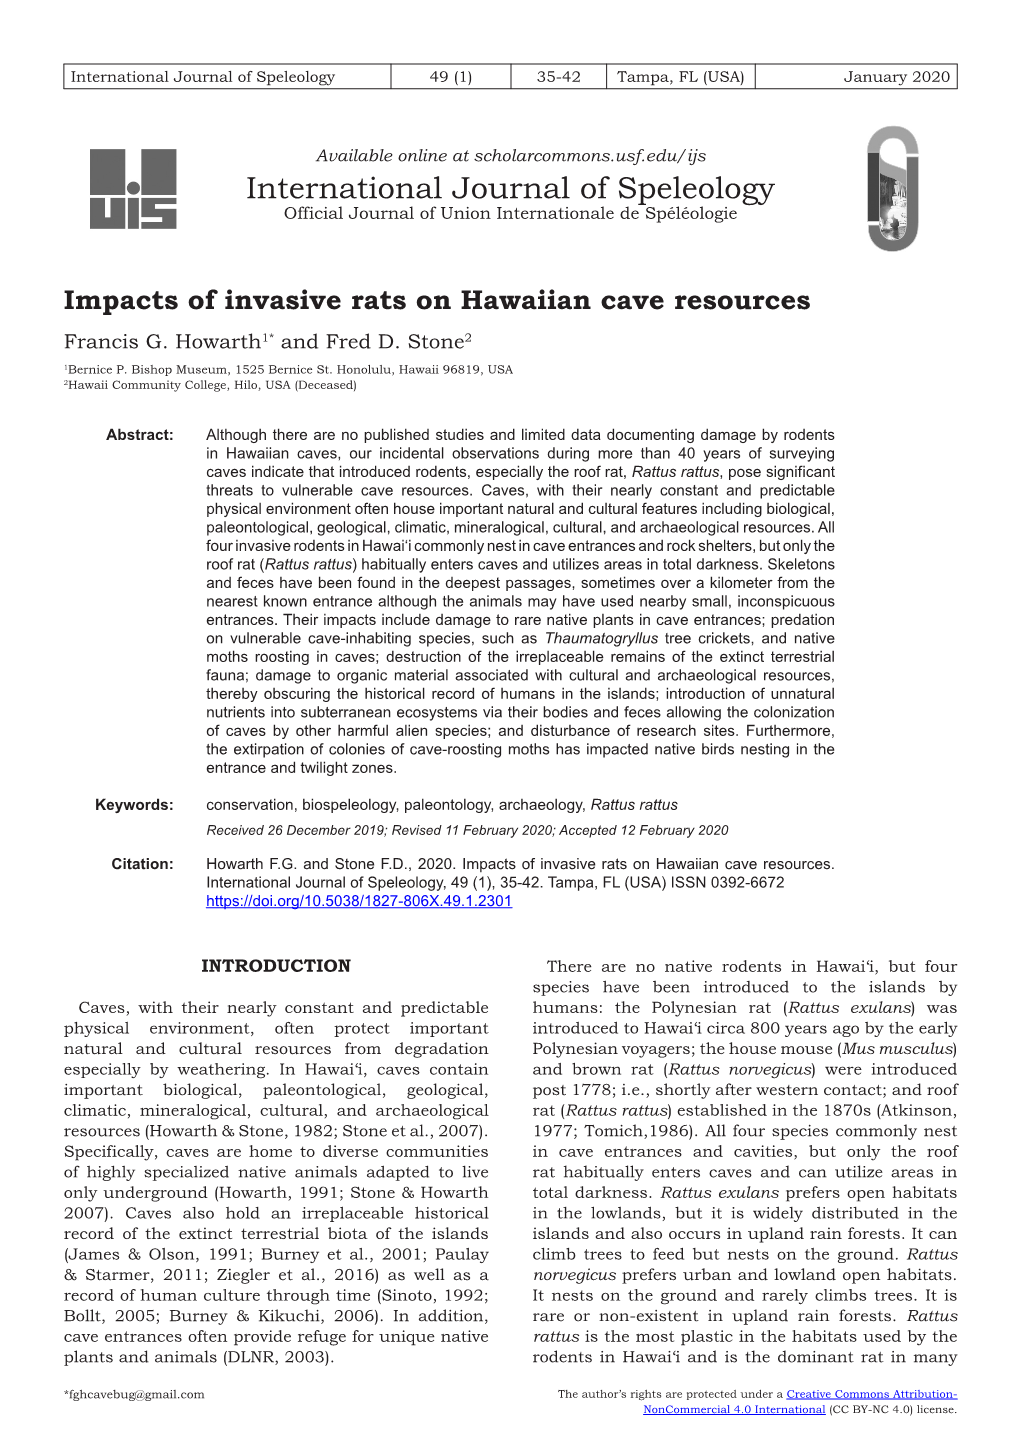 Impacts of Invasive Rats on Hawaiian Cave Resources Francis G